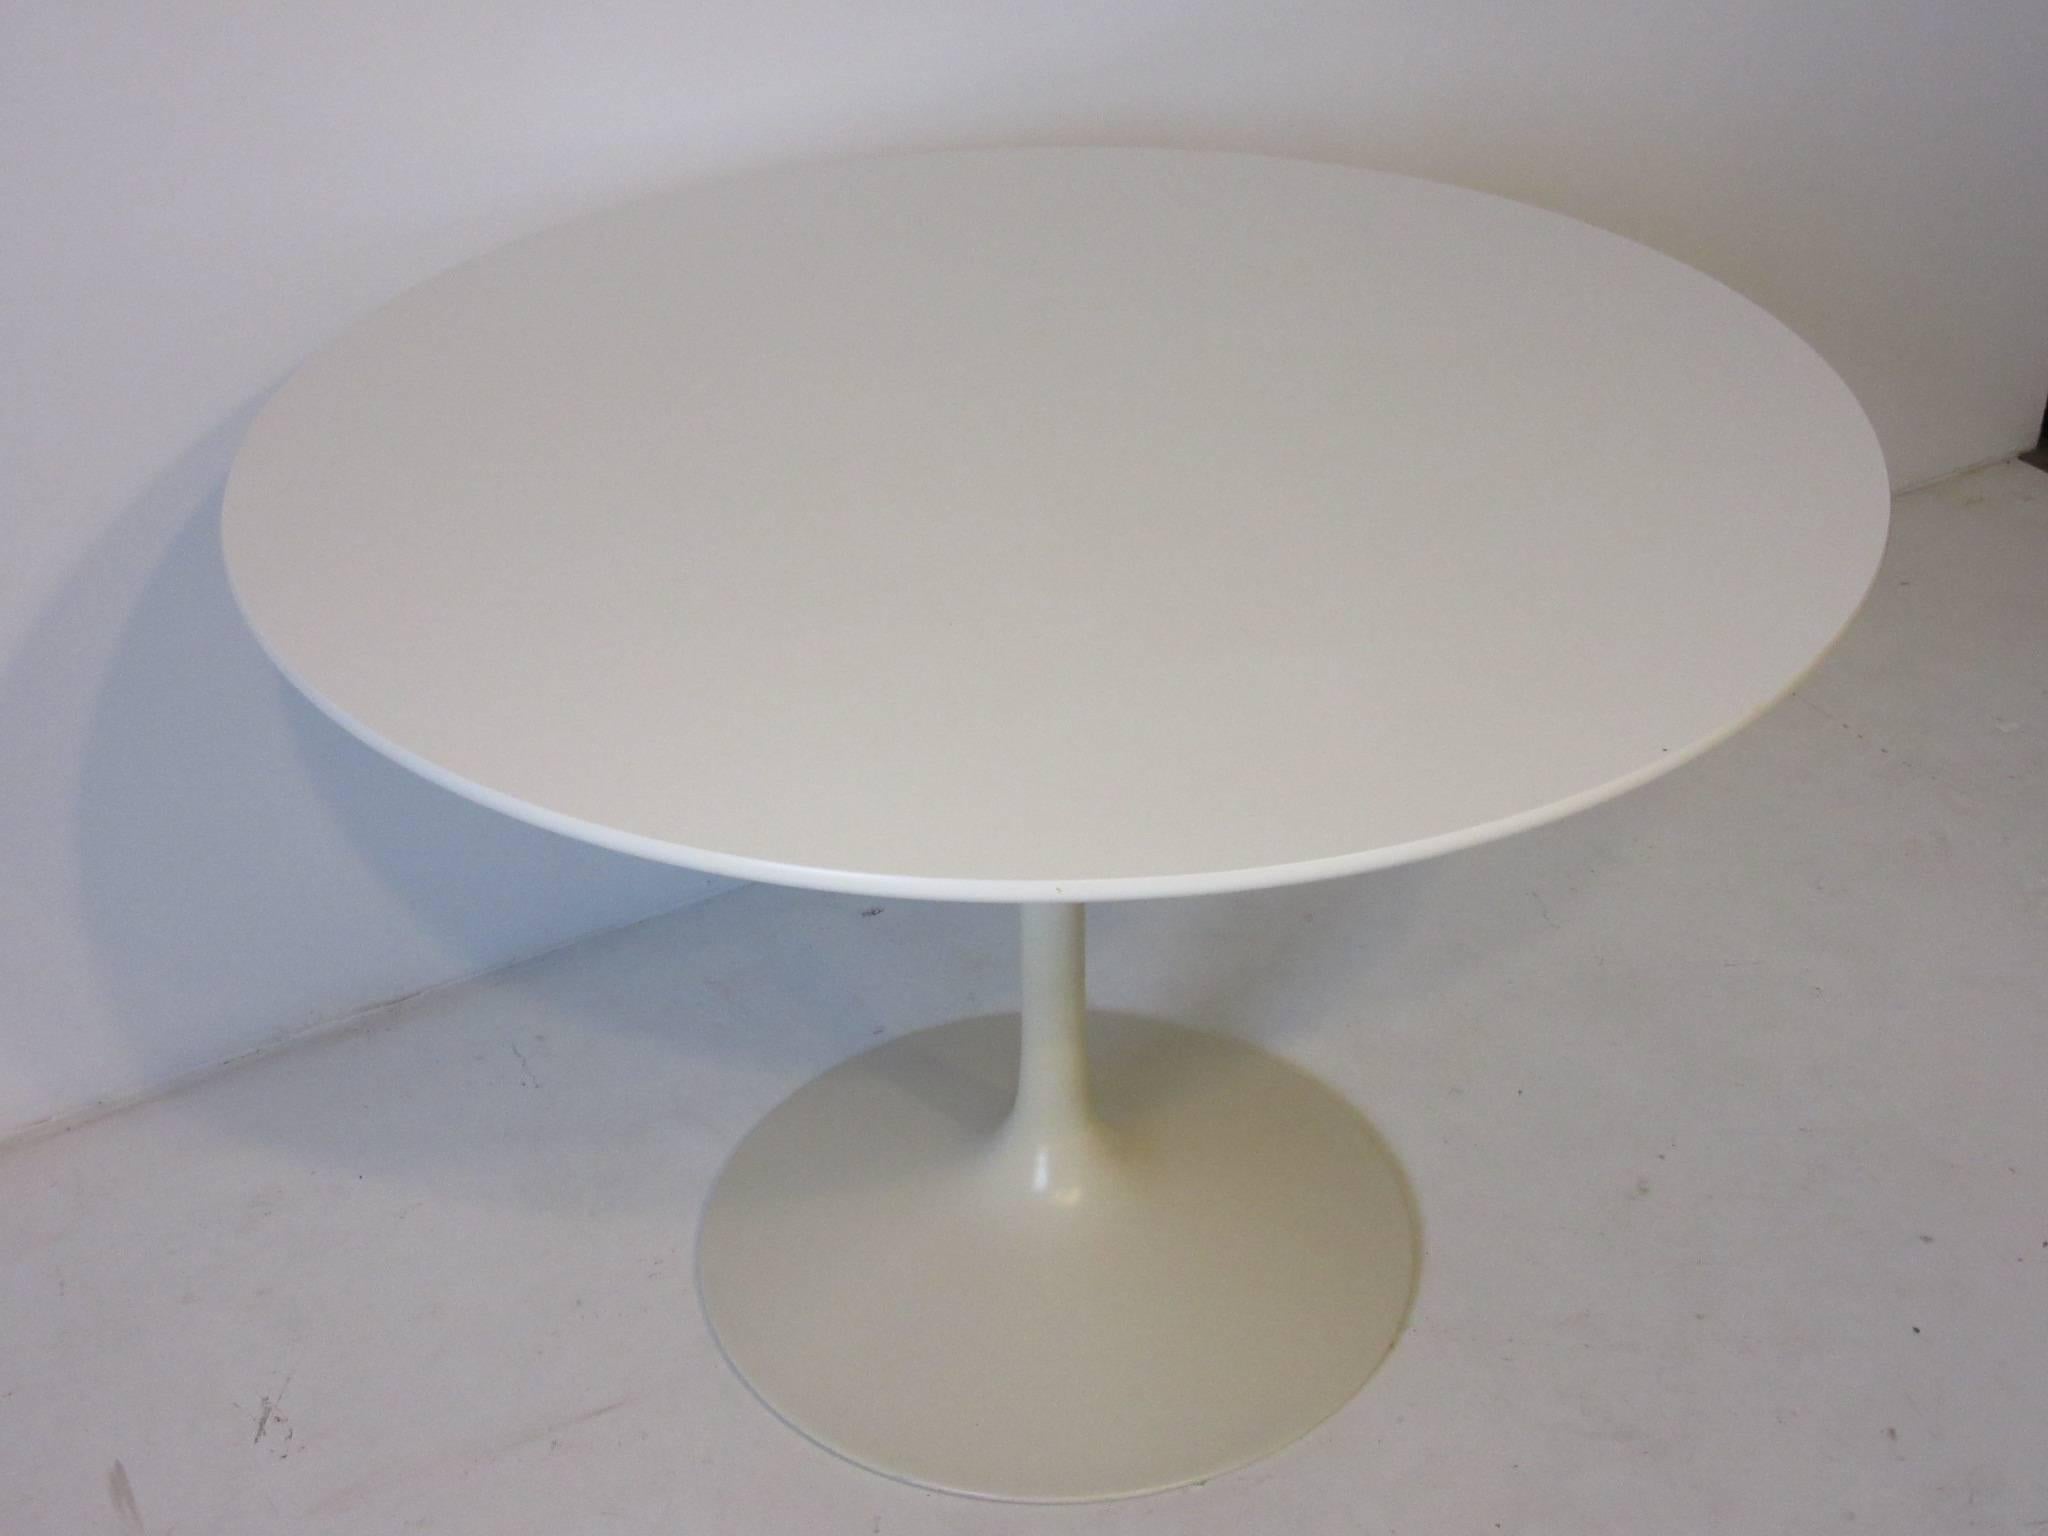 A white laminate topped tulip table with matching metal base manufactured by the Burke Furniture Company and designed by Maurice Burke. Perfect for that eat in kitchen or for that
office setting where you would need a smaller conference styled